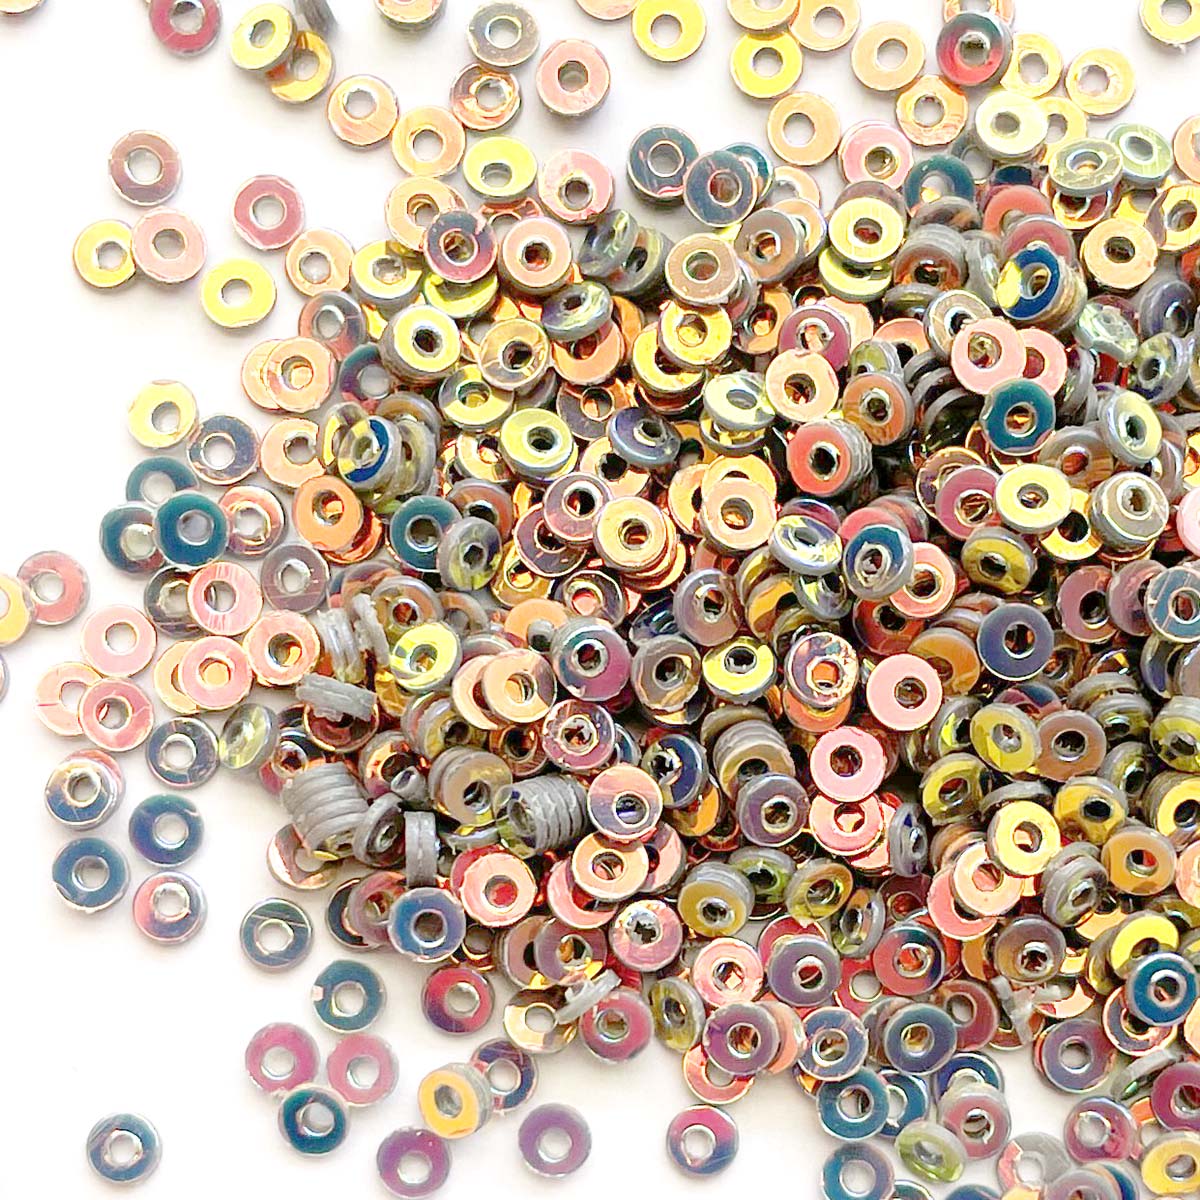 www.colourstreams.com.au Stitching Embellishment Colour Streams Sequins Flat 2mm Pale Blue Grey with Copper Lights Circle S21